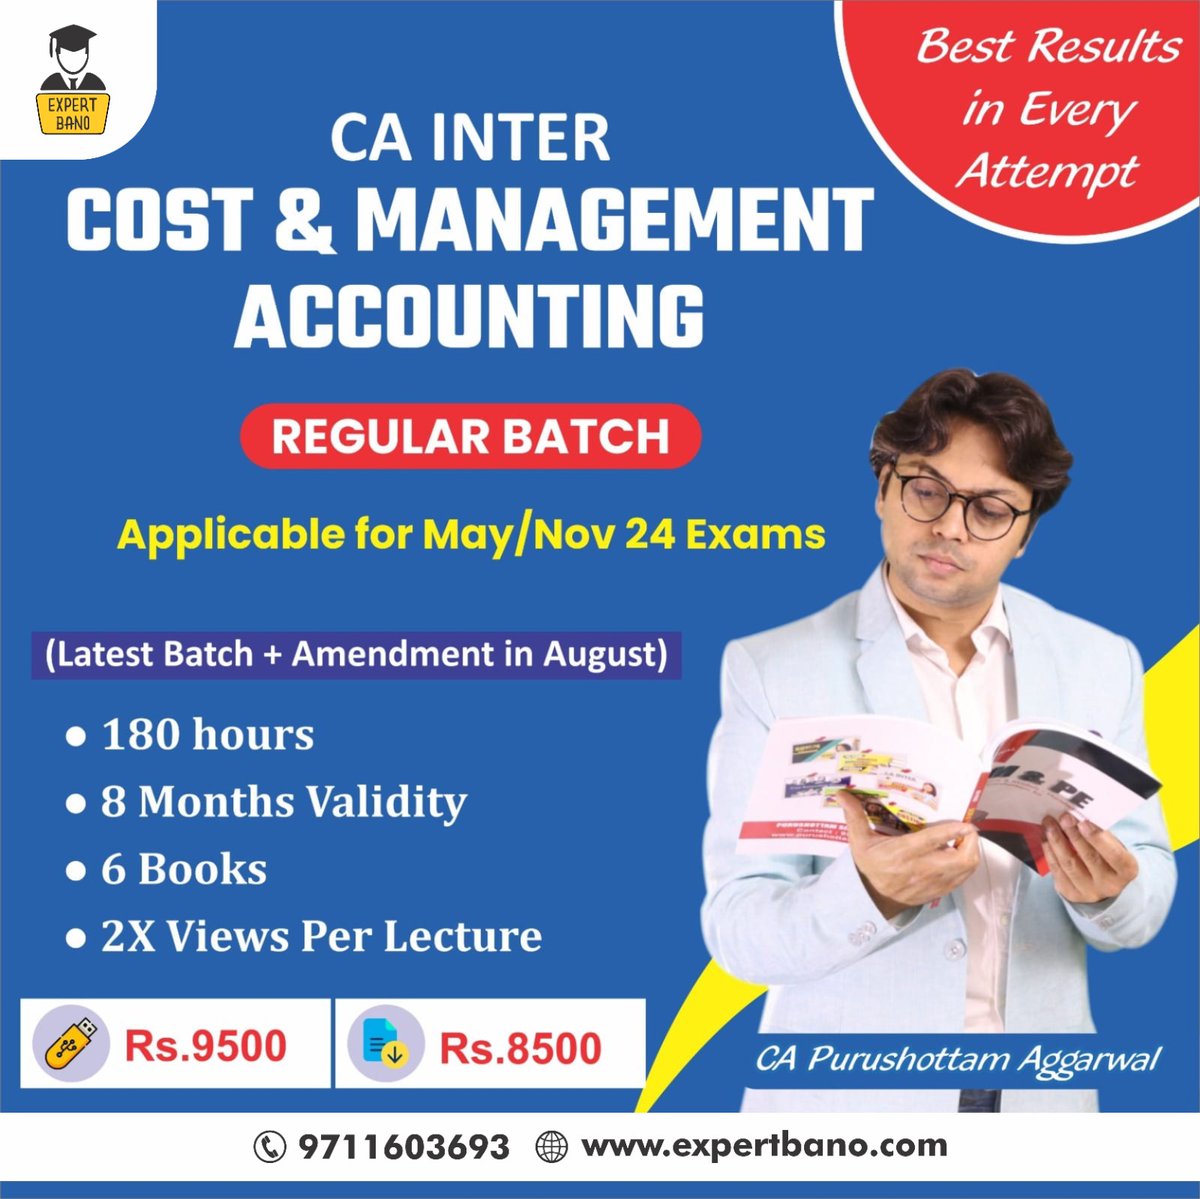 CA Inter Costing by CA Purushottam Aggarwal for May/Nov'24.
To buy, Visit:  bit.ly/3hCAIXA
Call on 9711603693 for inquiries.
#CAintercost #cafinalscmpe #capurushottamaggarwal #caexams #expertbano #cafinalcosting #caexams #CA #CAOnline #icai